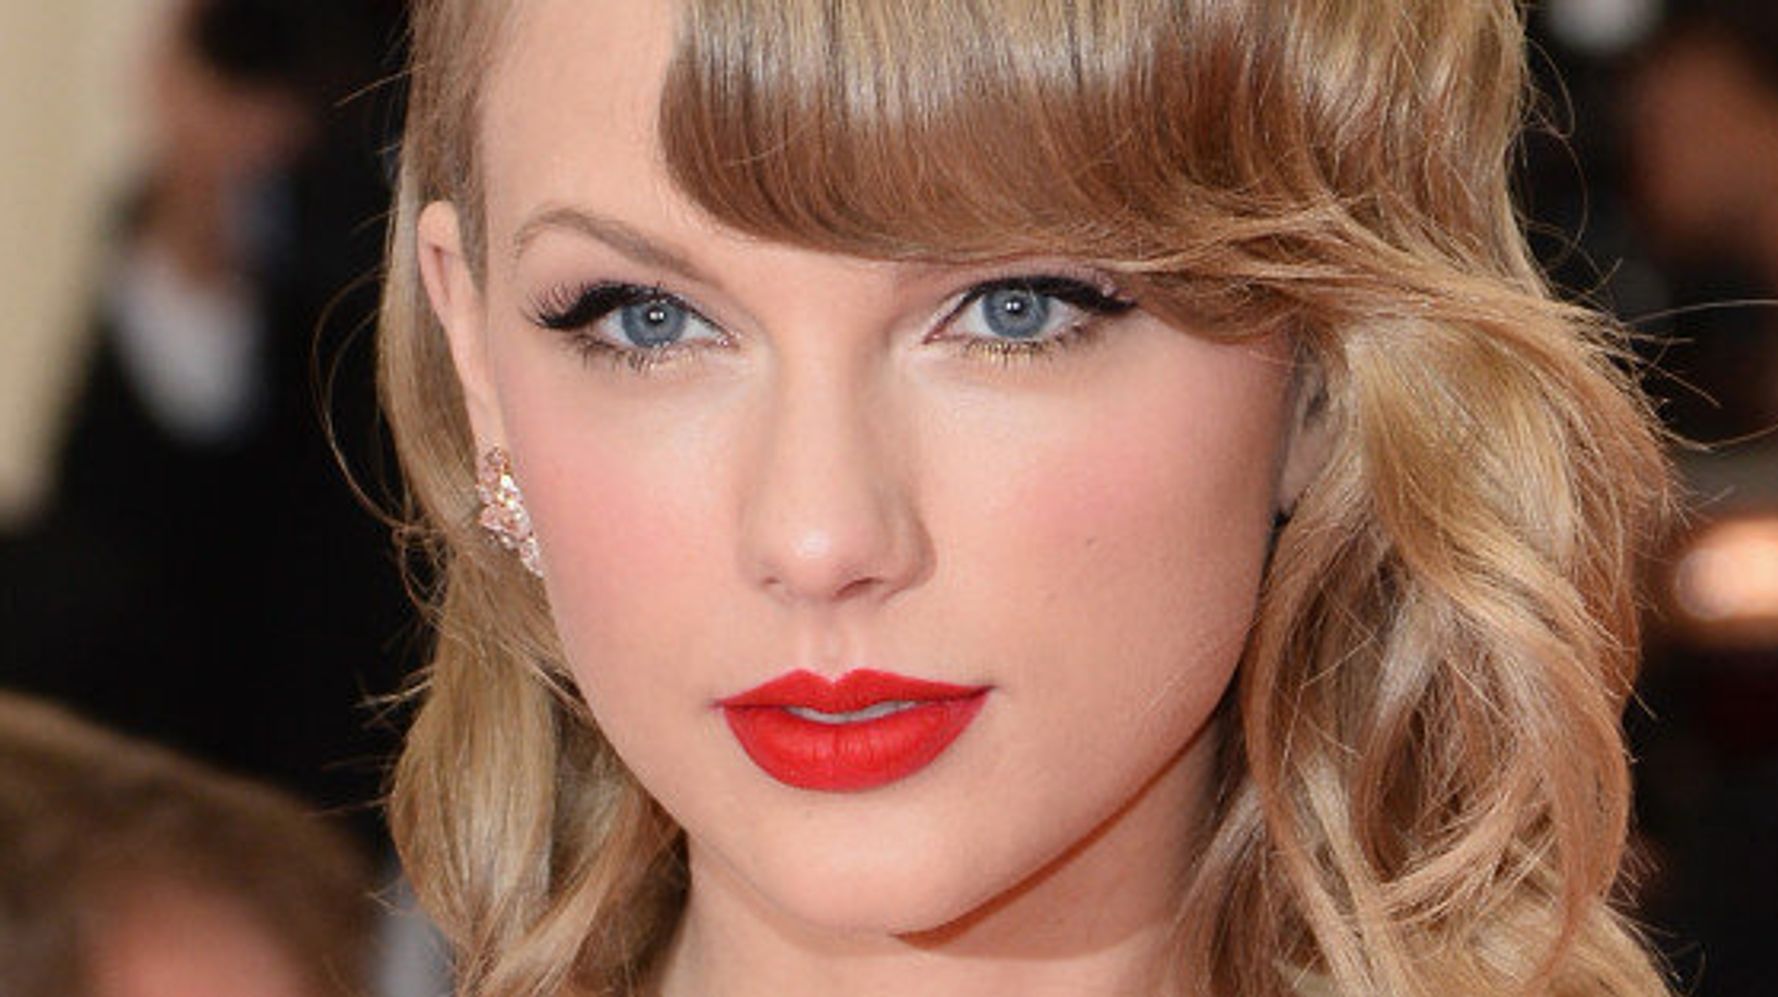 Taylor Swift Without Makeup (And With A Kitten) Is Super Cute